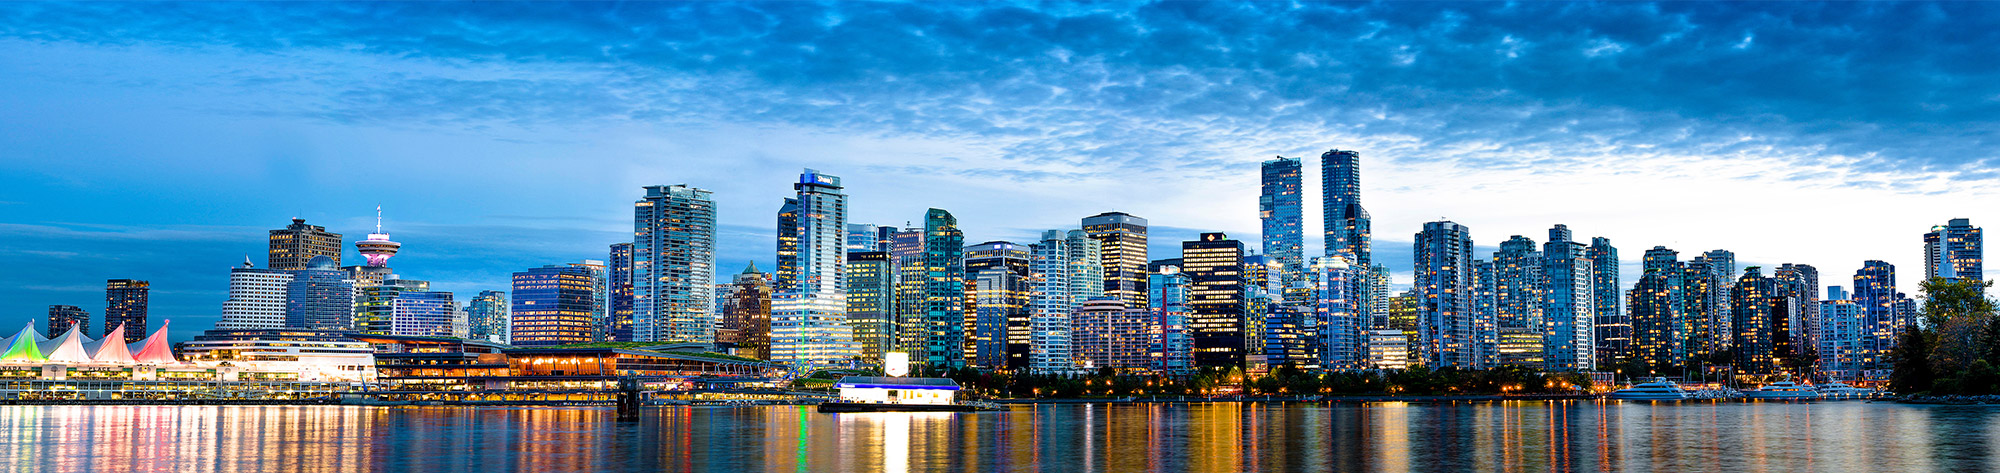 Evening skyline of Vancouver, British Columbia, where Bekatec provides online solutions